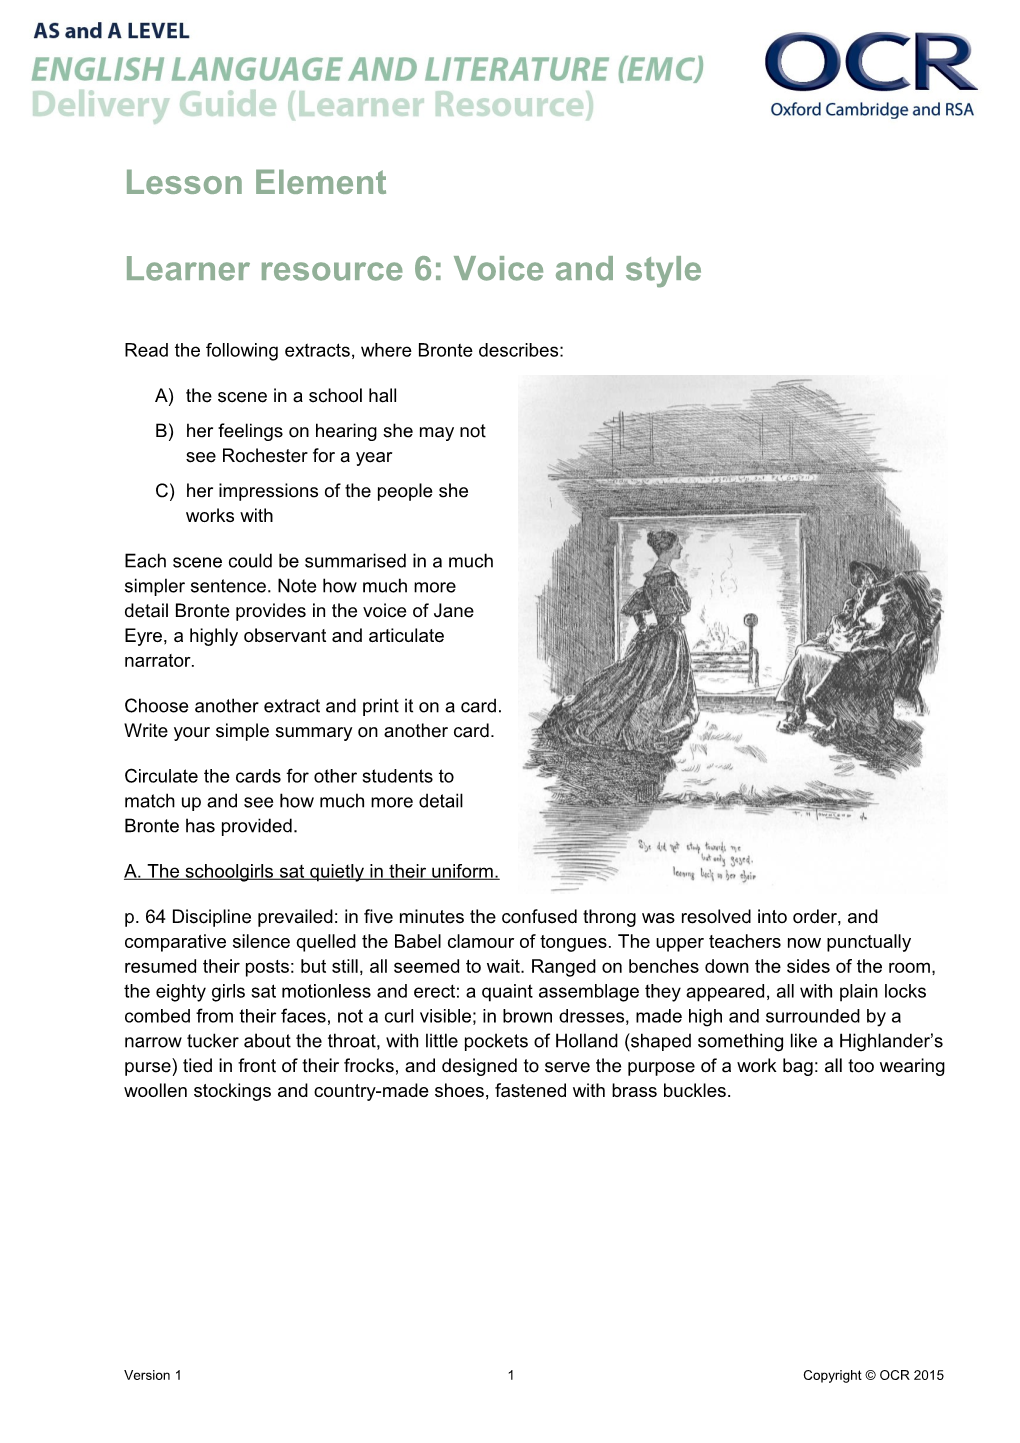 OCR AS and a Level English Language and Literature Learner Resource 6 - Voice and Style